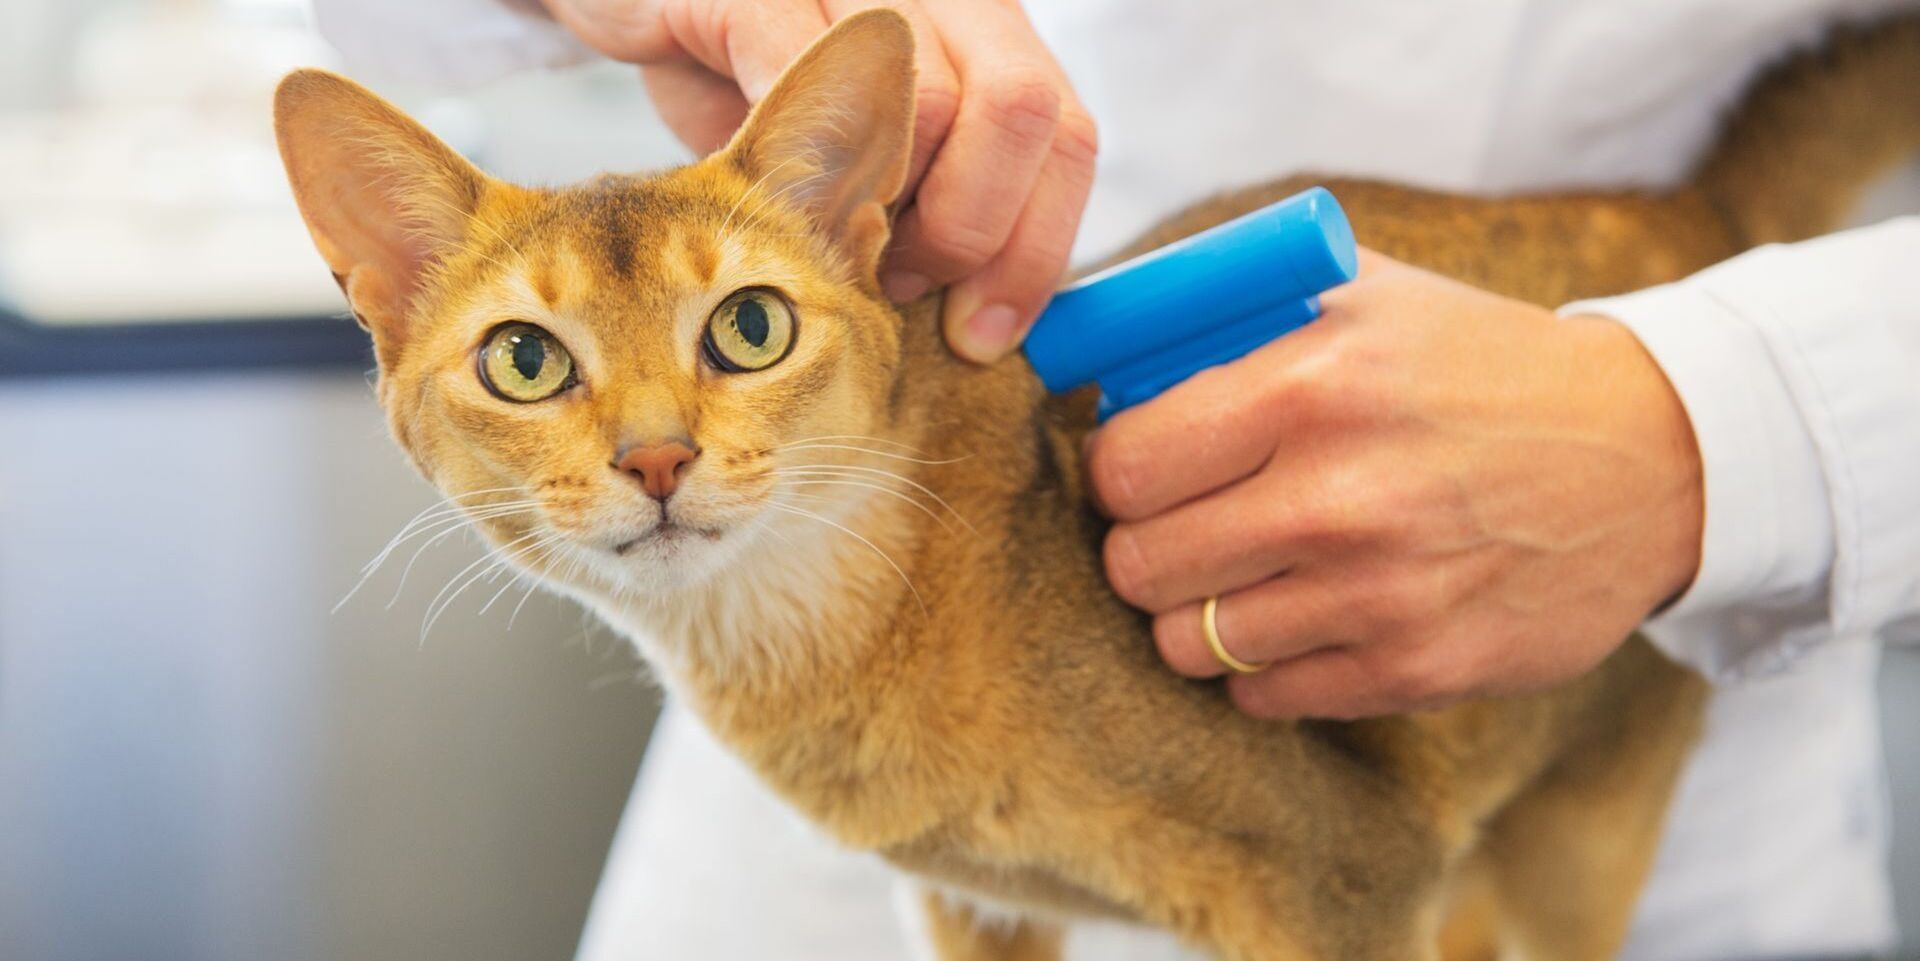 A Cat Being Fitted With A Pet Microchip